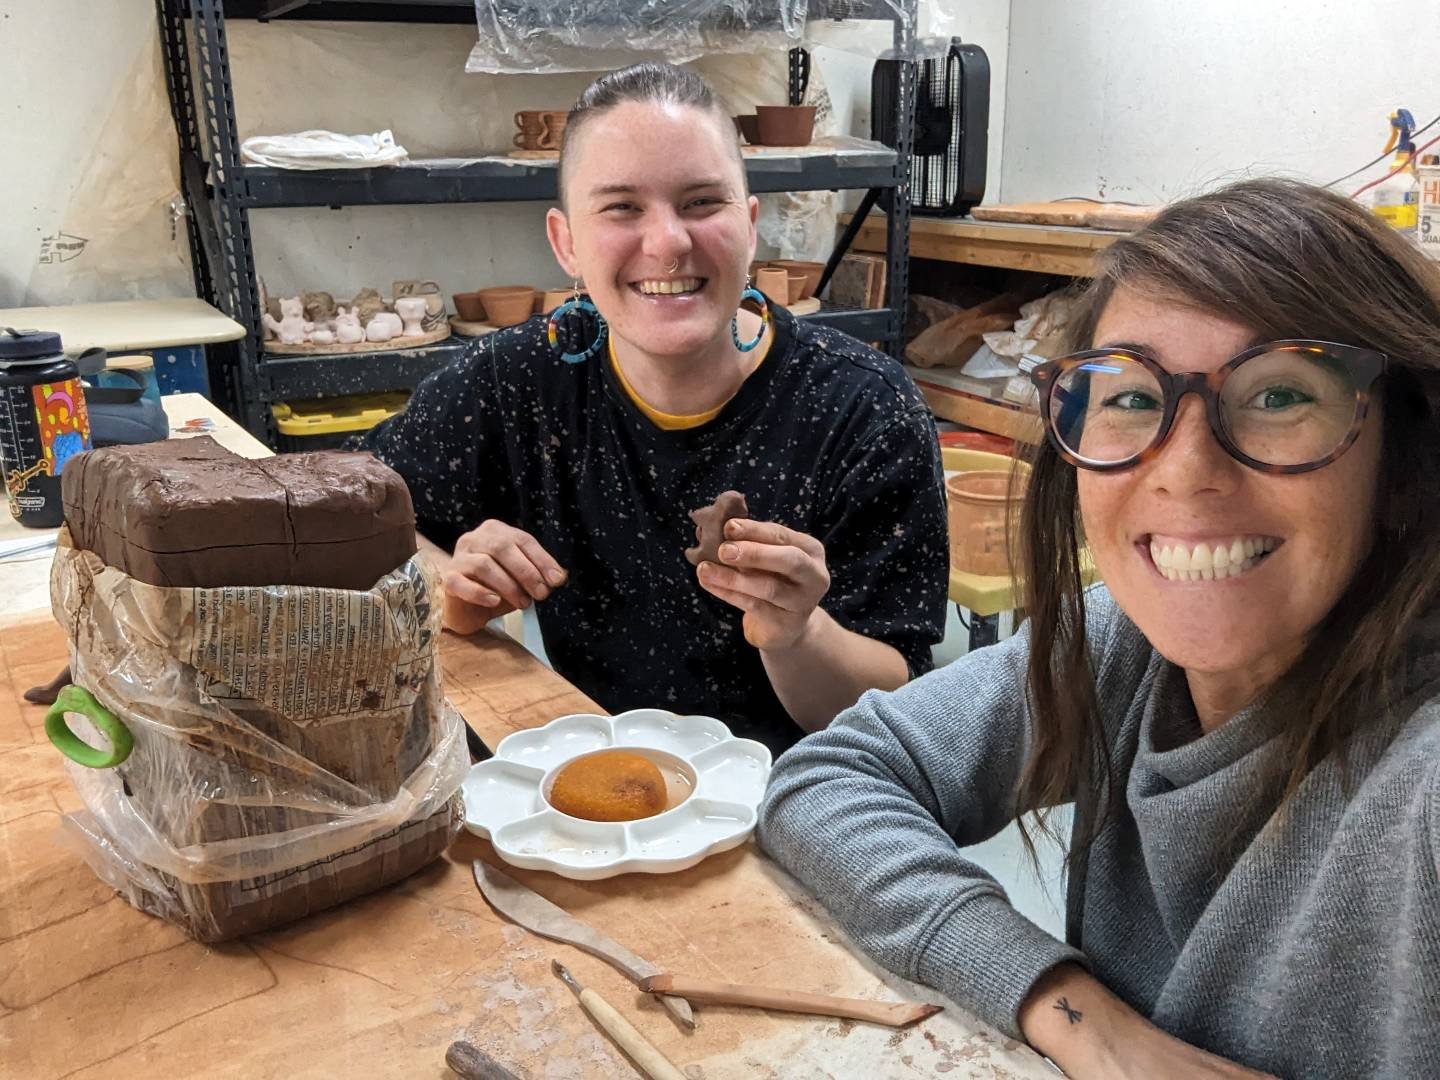 Mari-chan in the housseeeee! 
So awesome to be able to make lil' shisa and celebrate ancestry with fellow choodee in the new studio! Heart is full 🌺💜

@becoming.mari
#pottery #ceramics #shisa #okinawa #colorado #handmade #handcrafted #ouray #ourayc